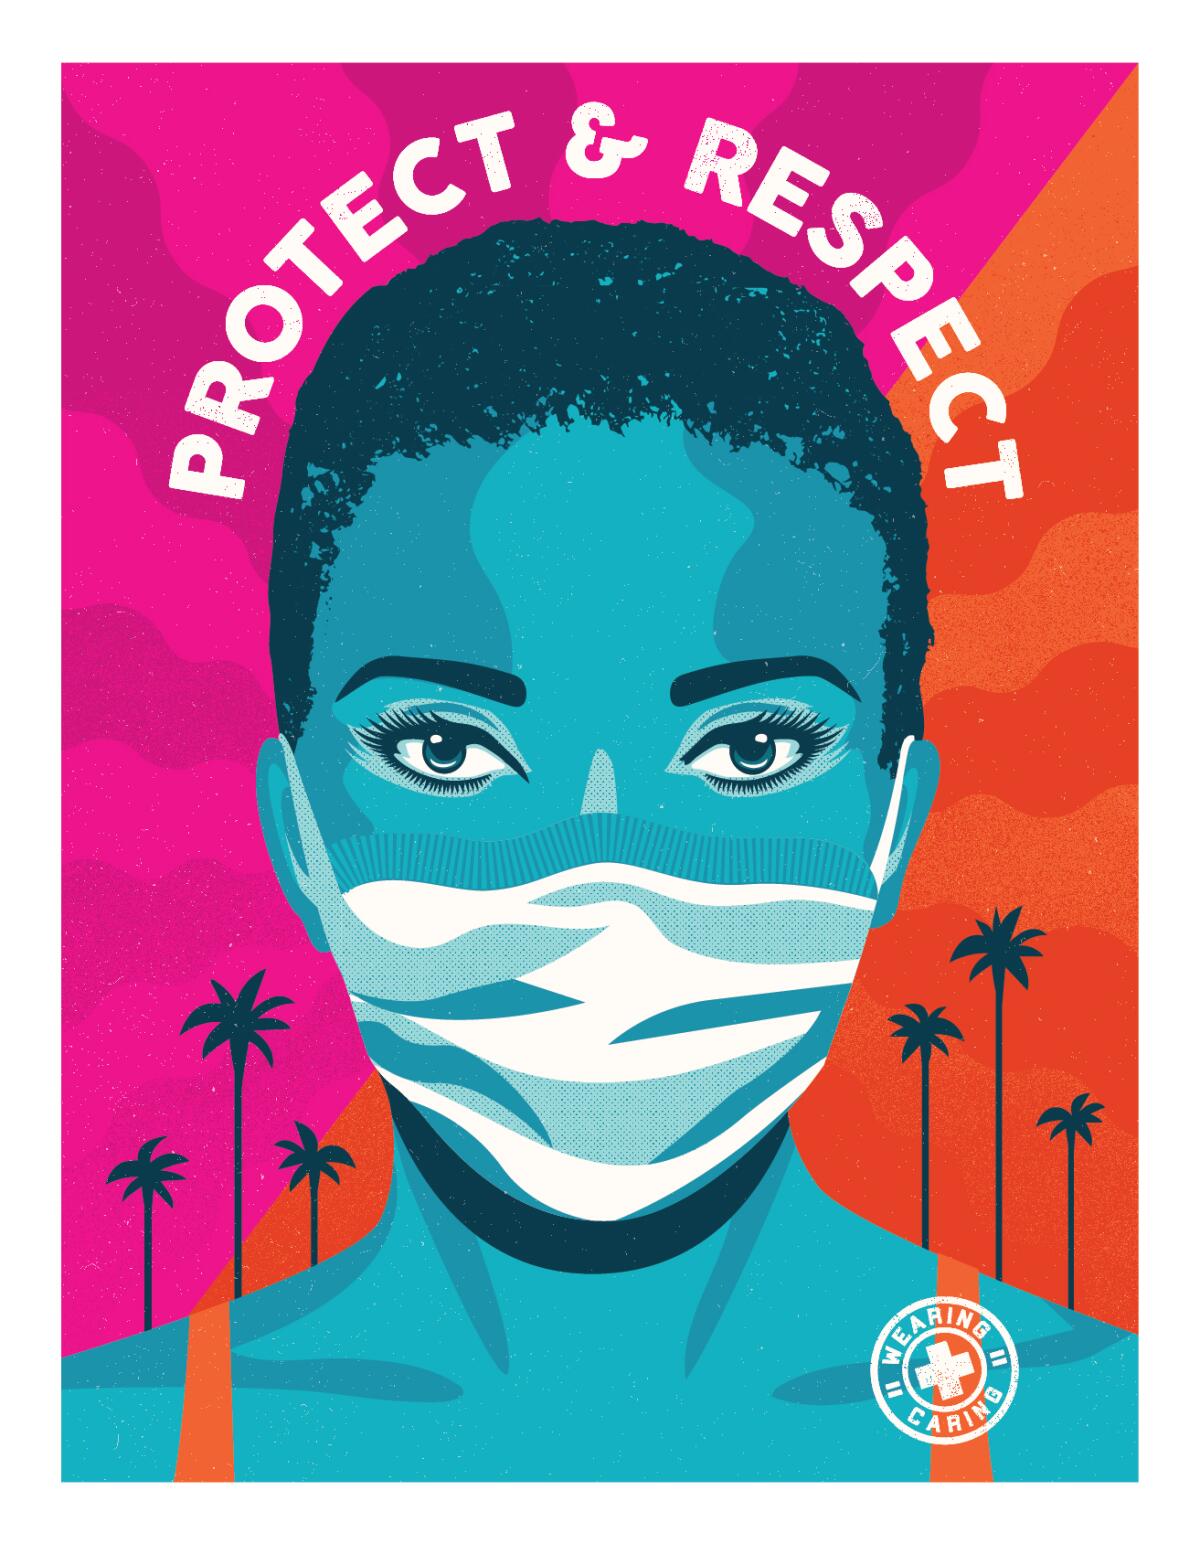 A "Protect and Respect" poster, designed by Shepard Fairey’s Studio Number One and Camilla Lonis, of a woman wearing a mask.